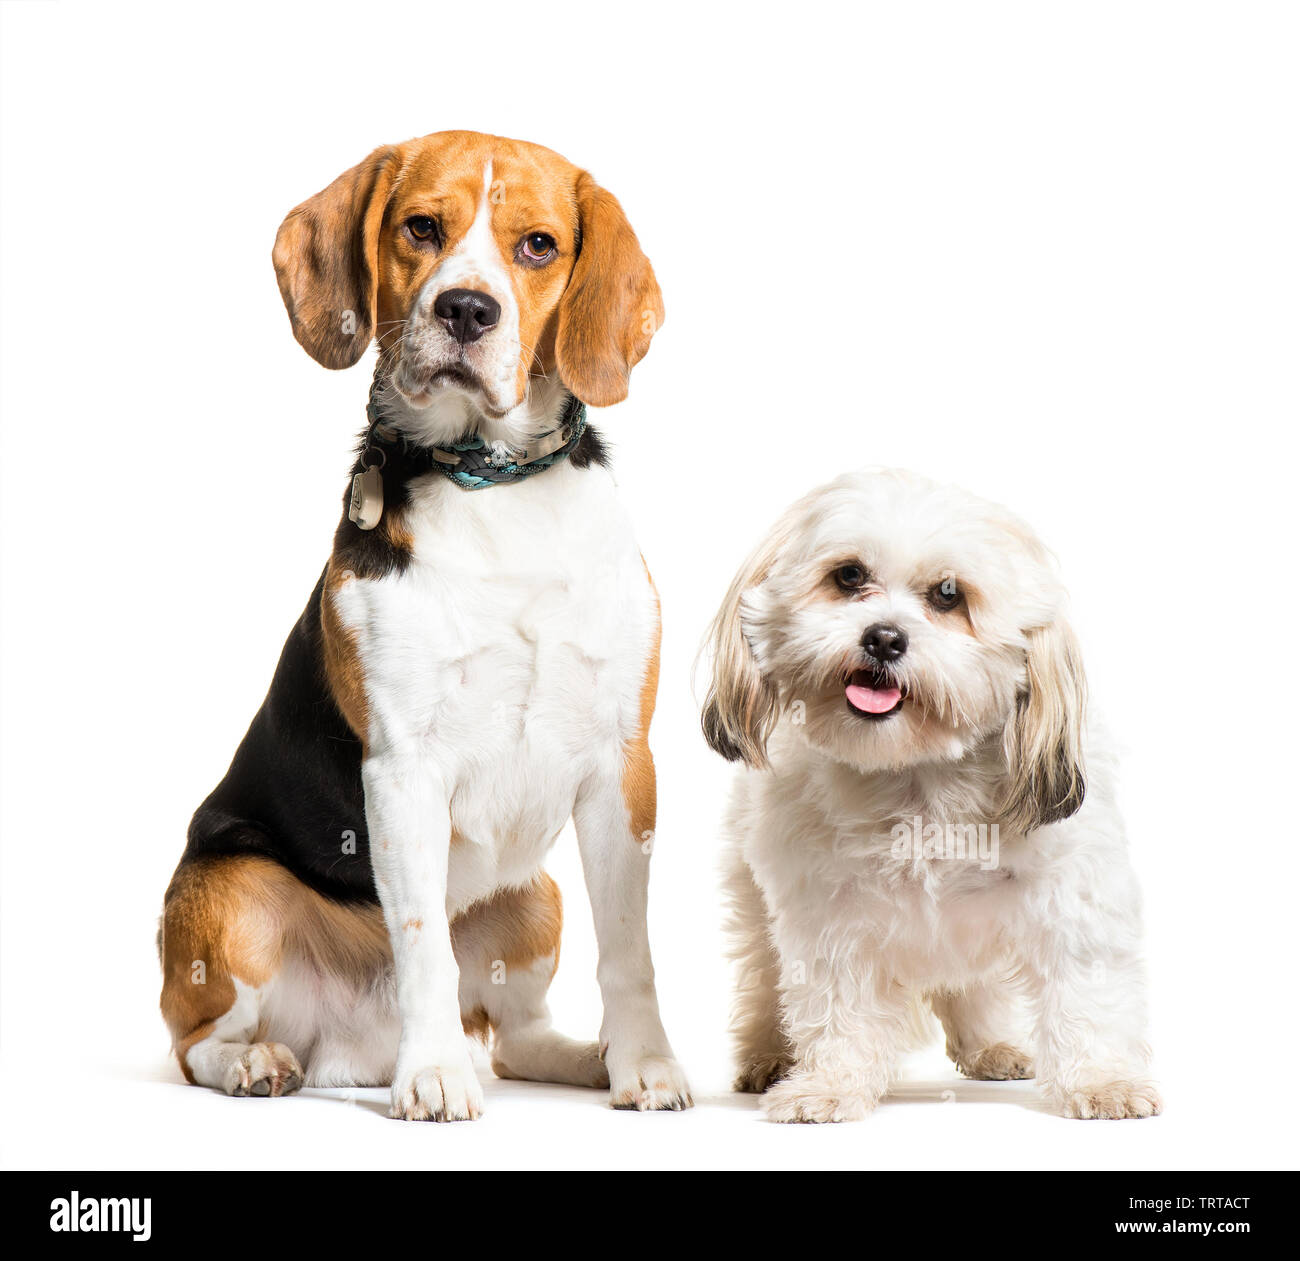 Beagle, Mixed-breed dog sitting in front of white background Banque D'Images